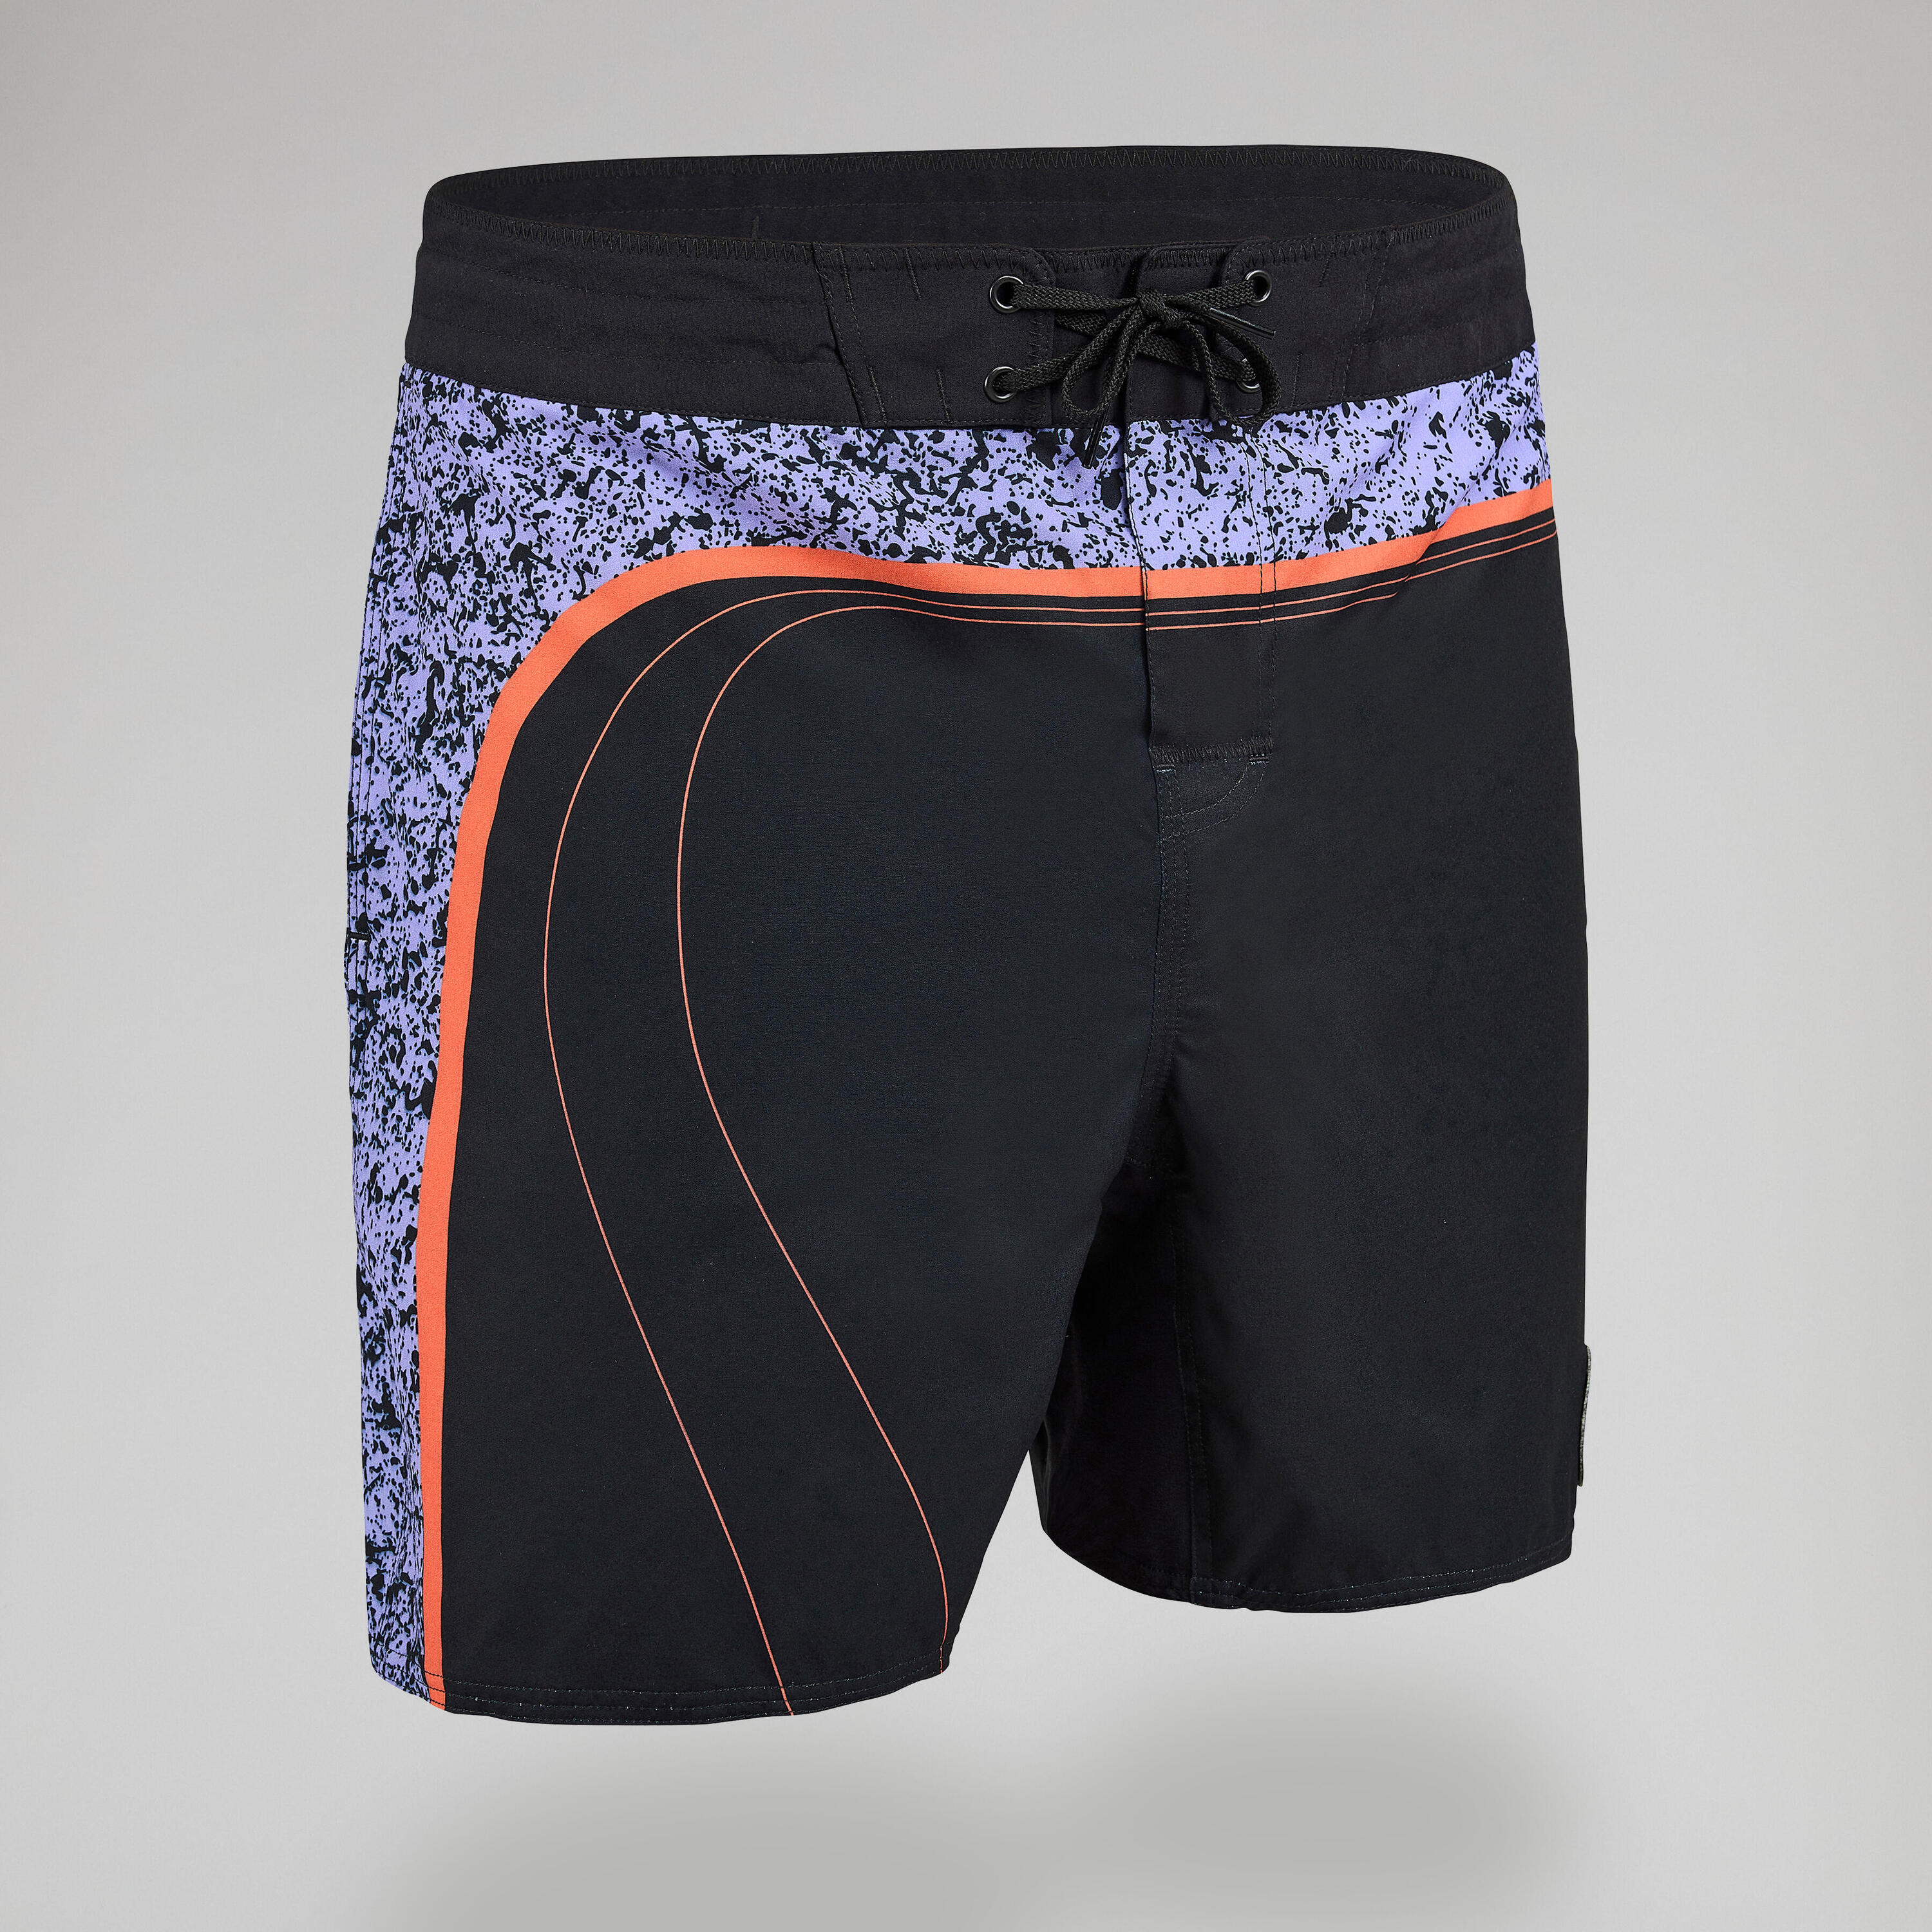 OLAIAN Surfing boardshorts 500 17" REVIVAL